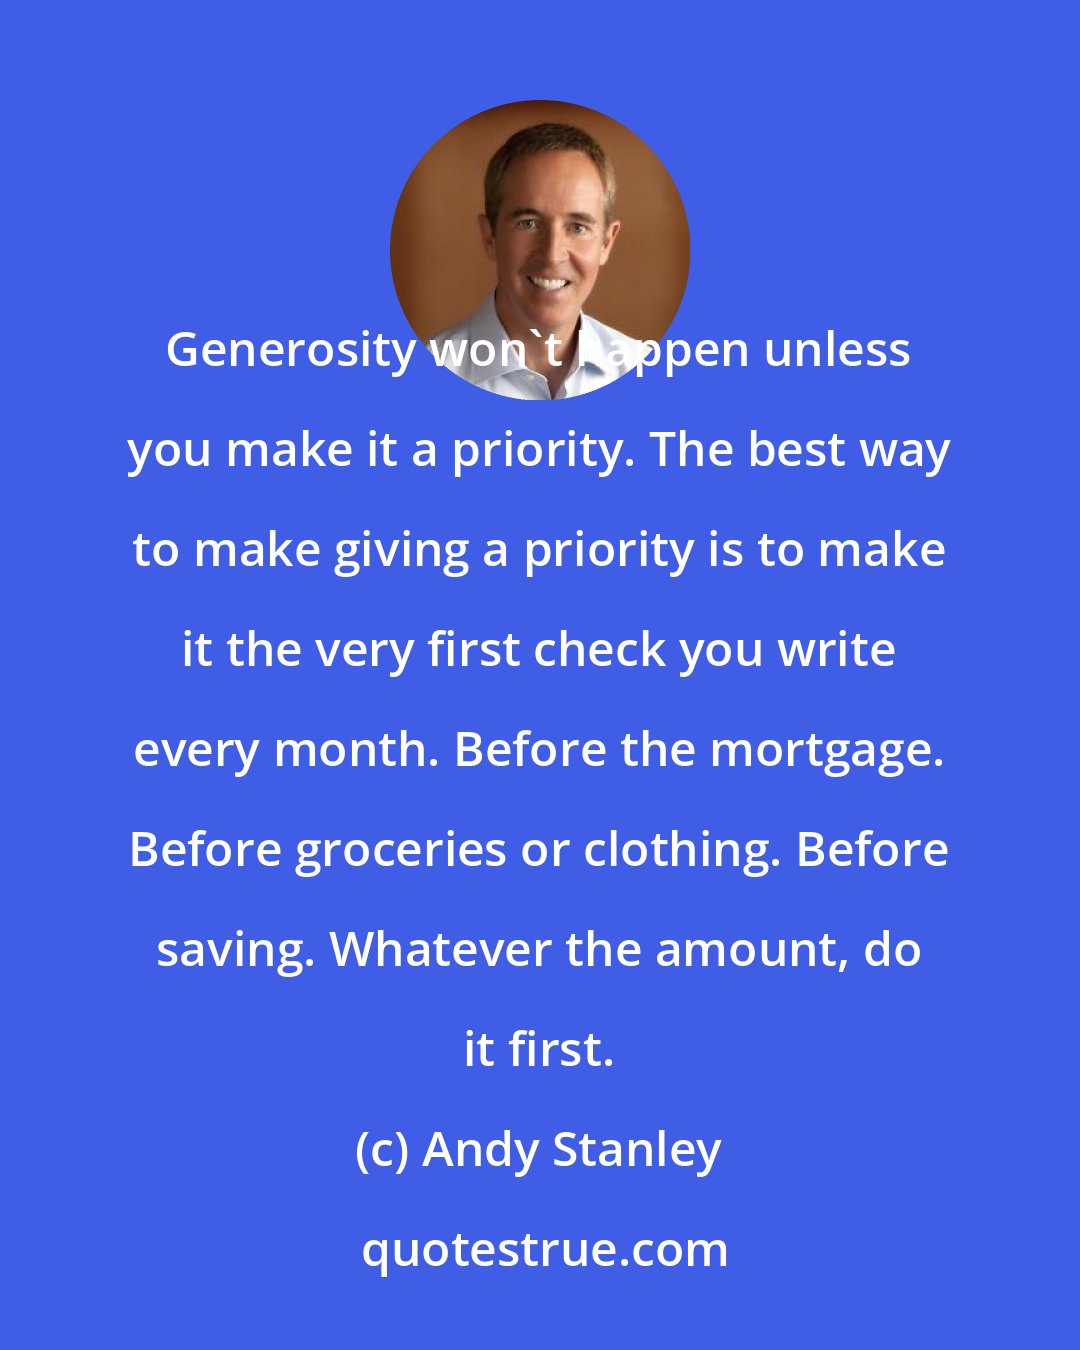 Andy Stanley: Generosity won't happen unless you make it a priority. The best way to make giving a priority is to make it the very first check you write every month. Before the mortgage. Before groceries or clothing. Before saving. Whatever the amount, do it first.